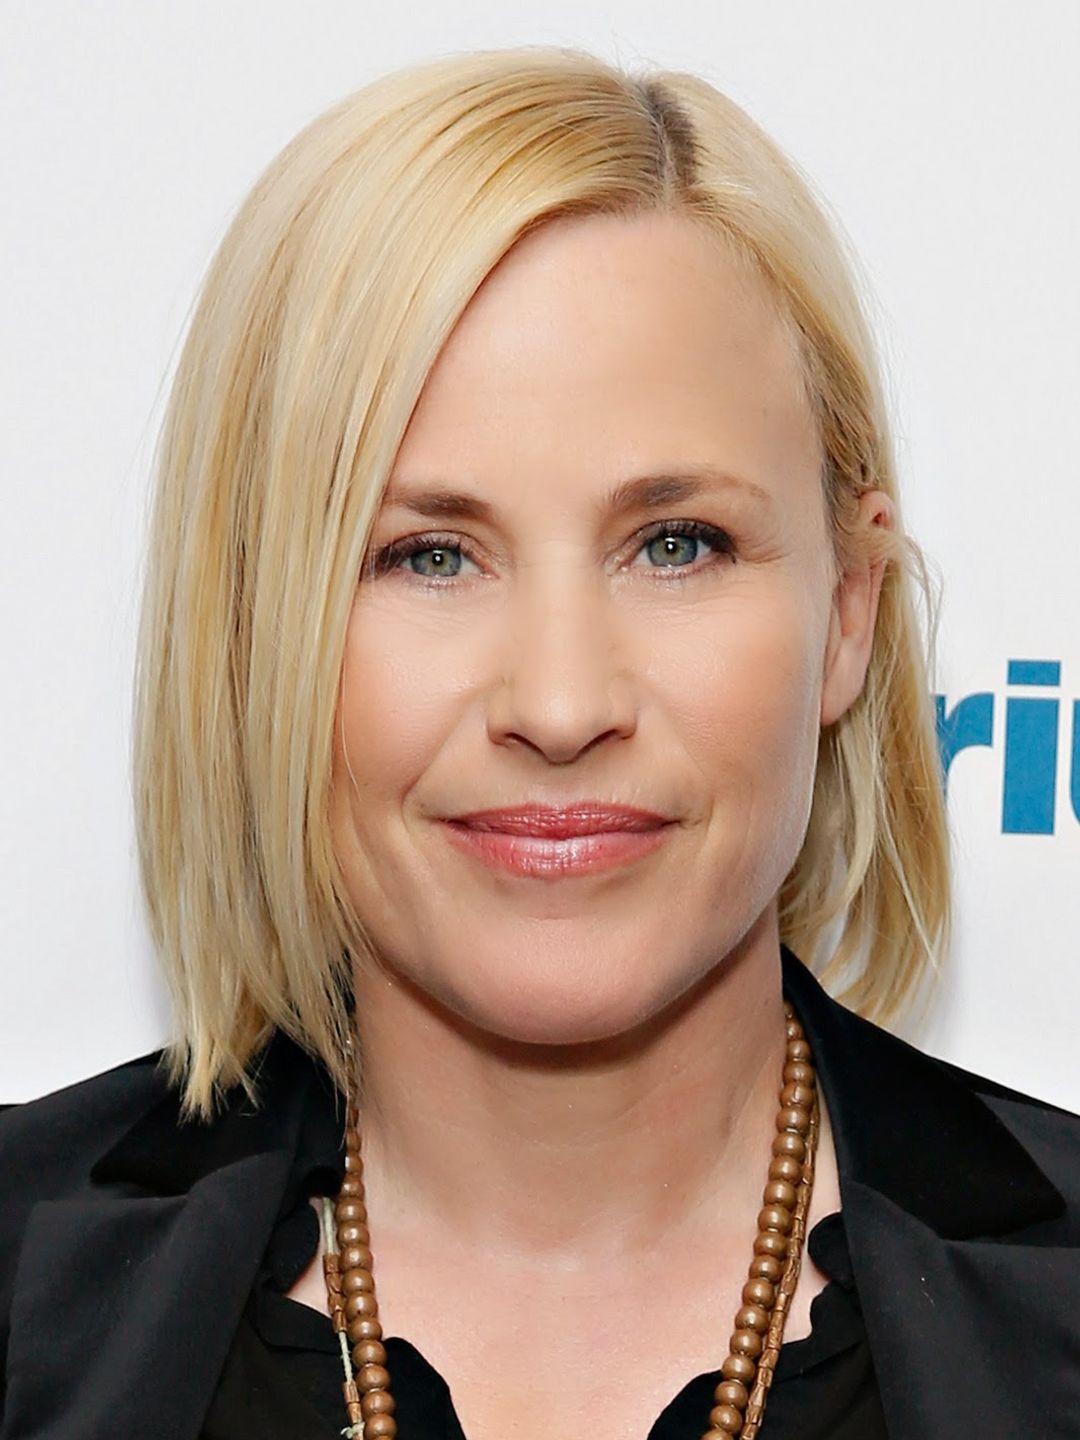 Patricia Arquette early childhood